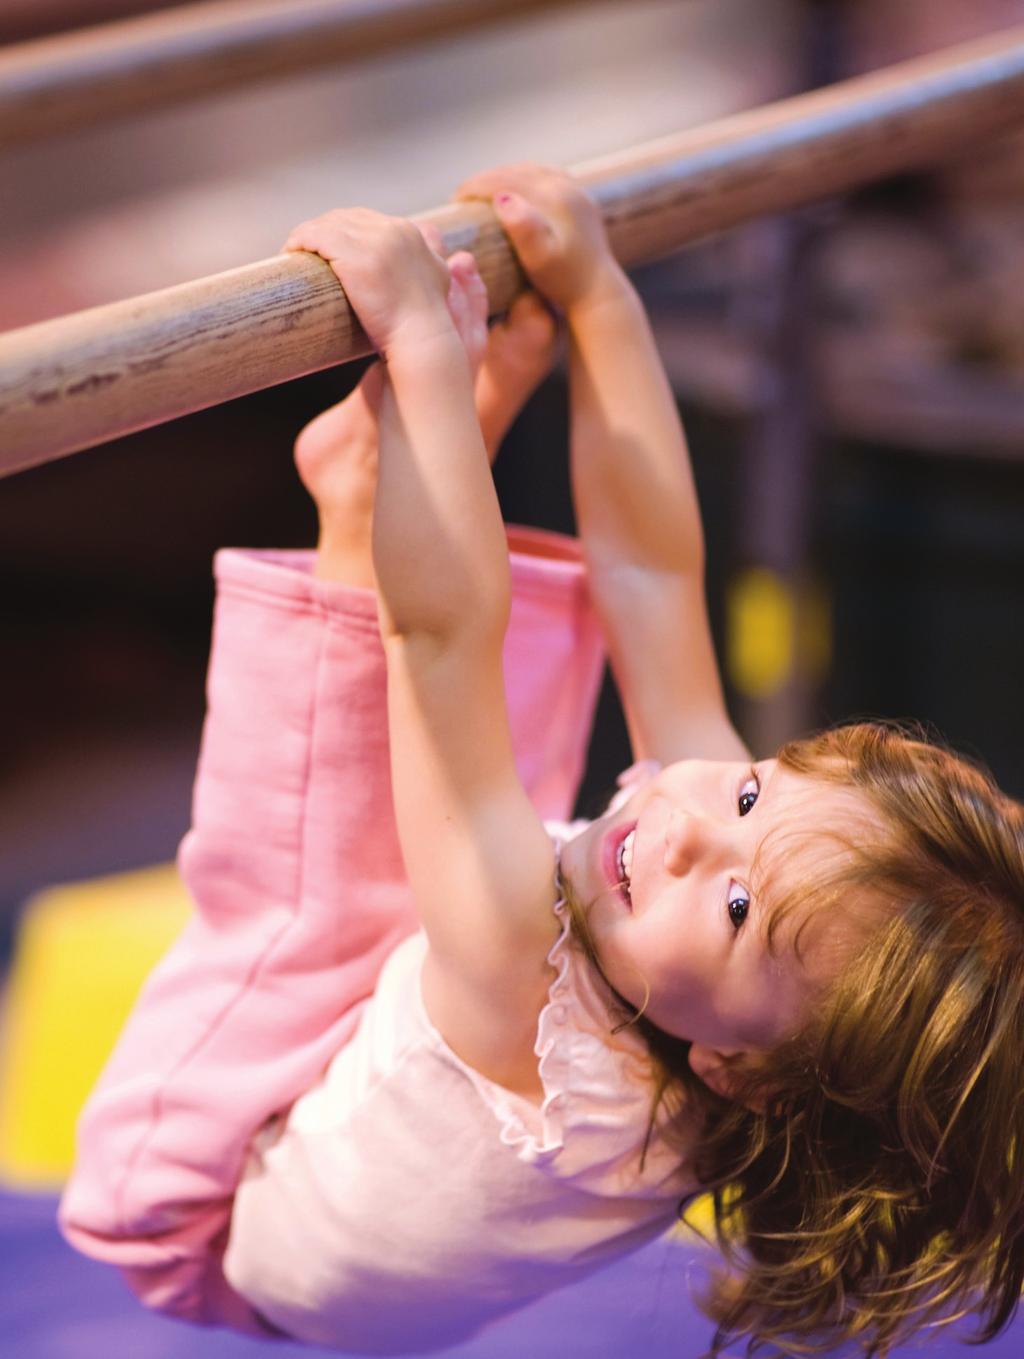 Tumbling Ages 3-12 Purple Kitten For the child who is new to tumbling. Focus: Body Position Safety Skill: Always ask permission before getting on the equipment.